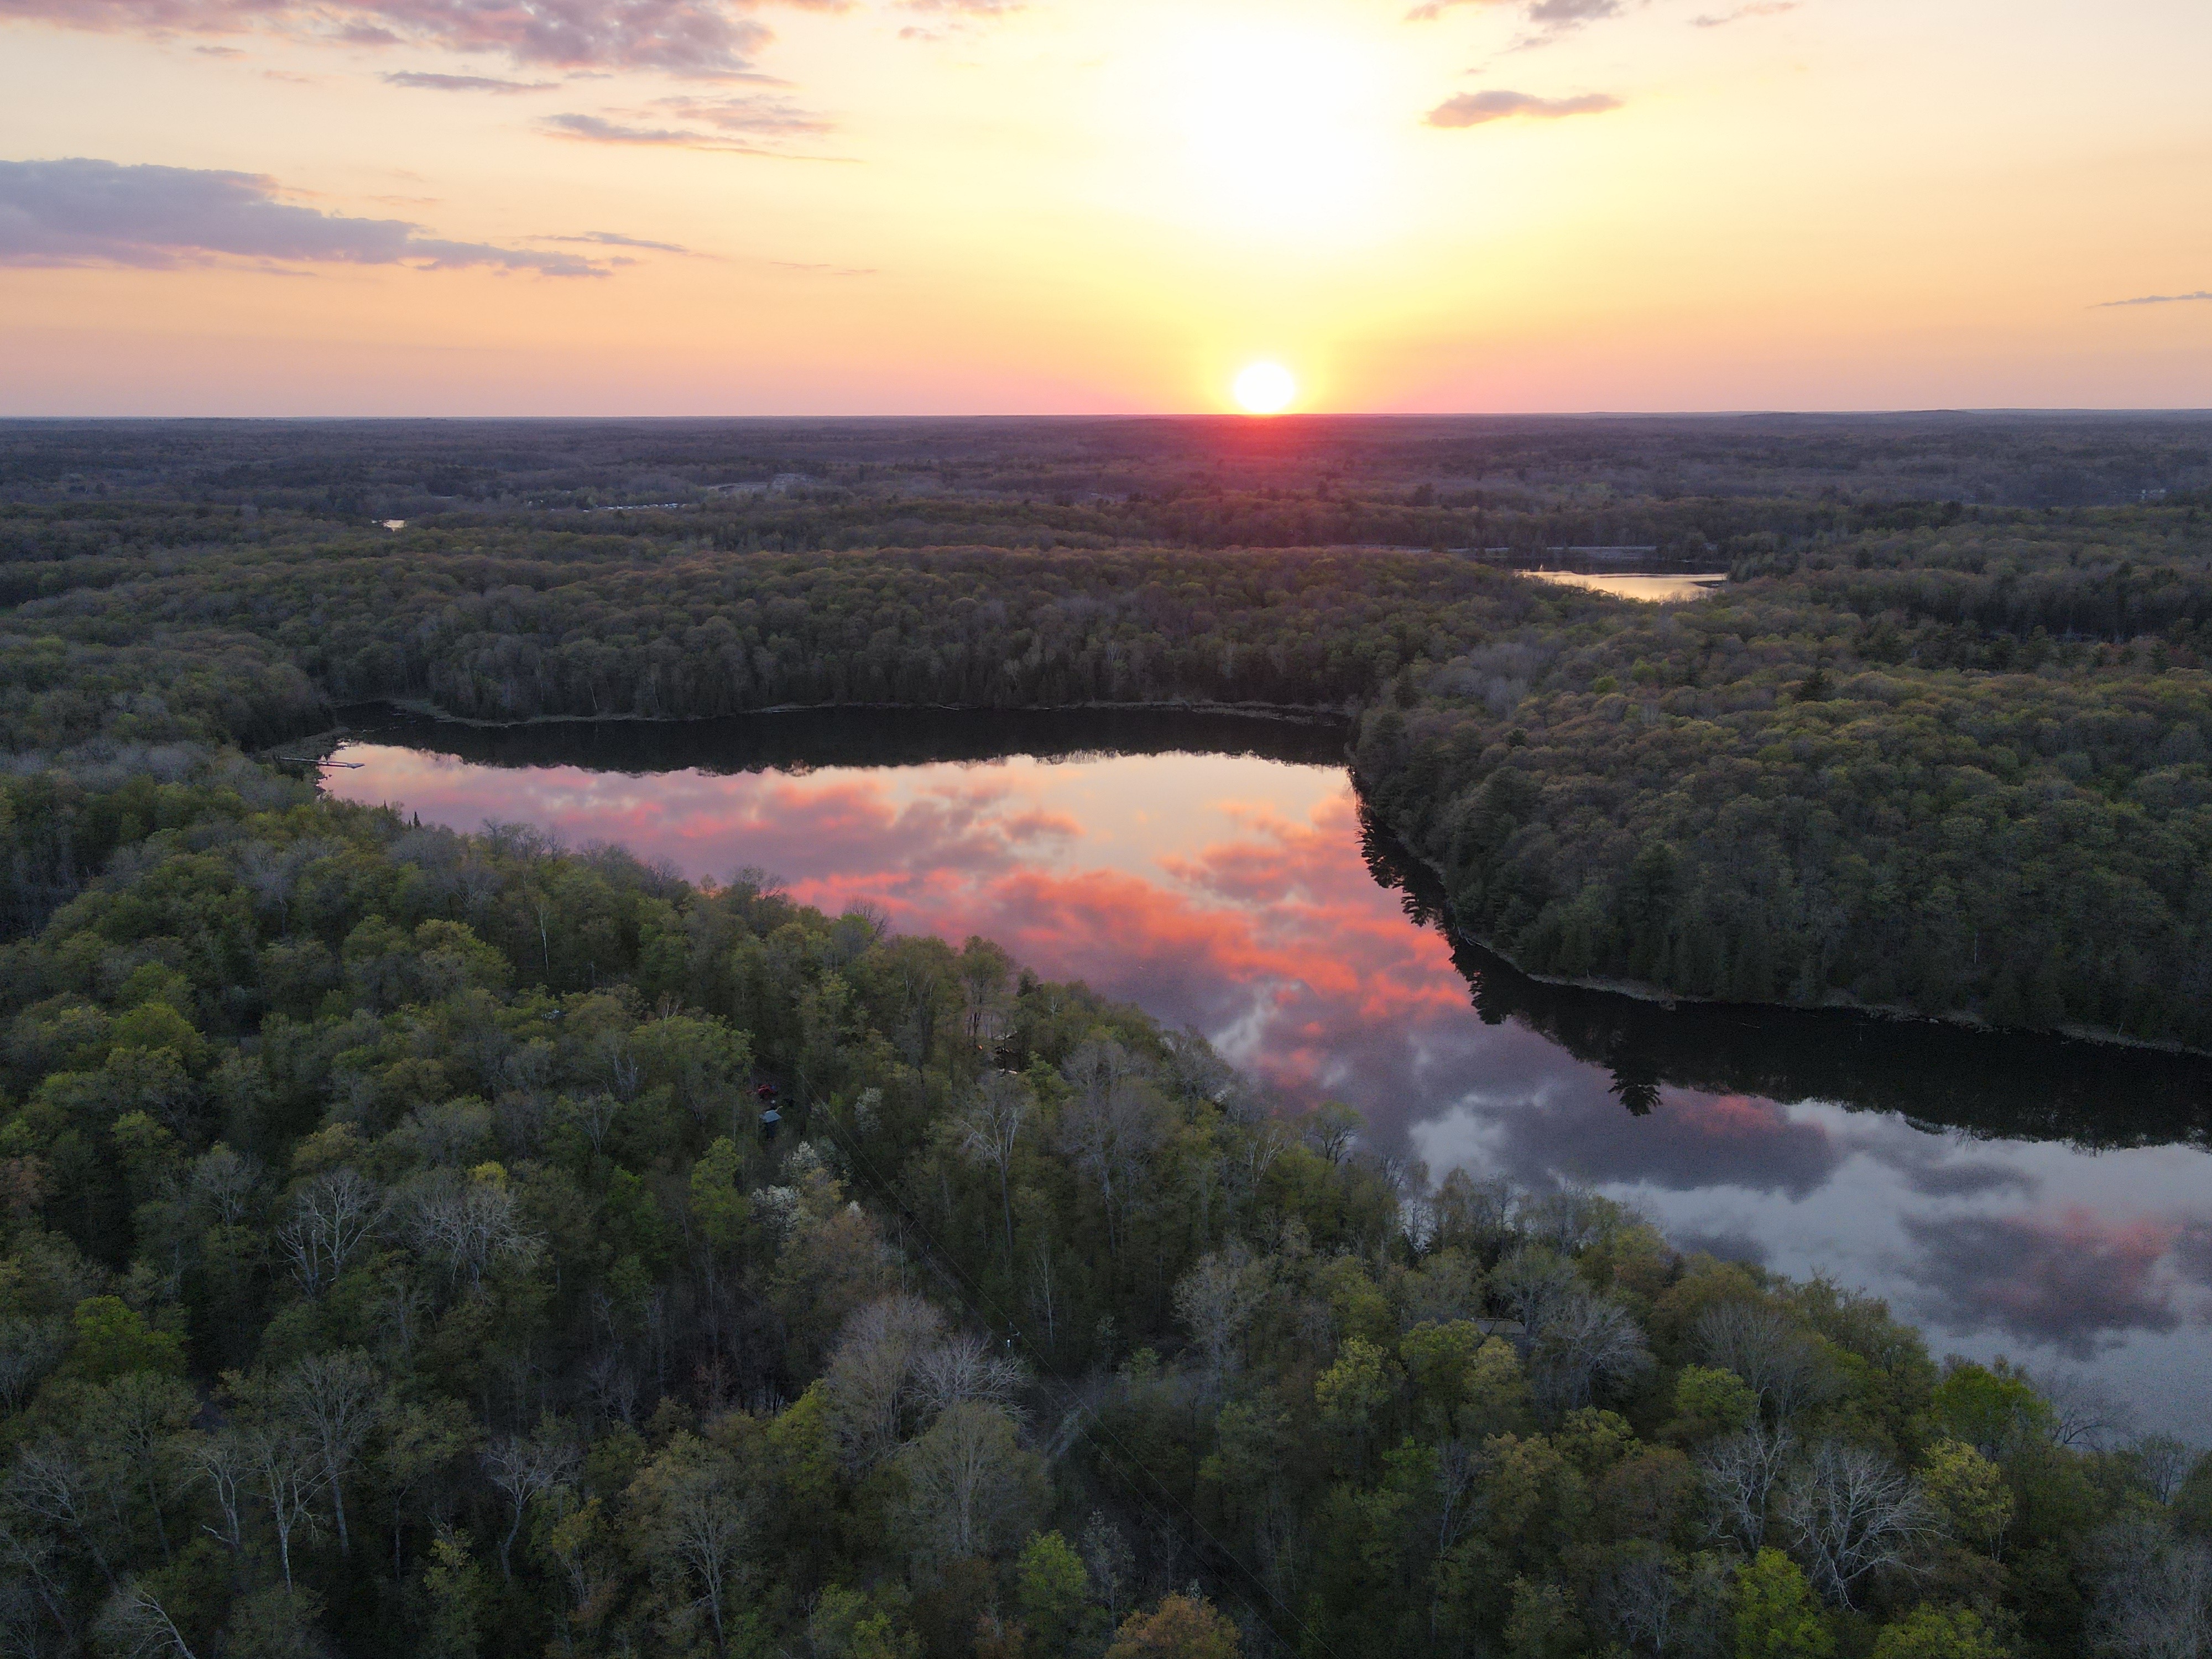 Arial photo at sunset of the lake the property sits on, the calm lake reflecting the purple, pink, and orange sky.